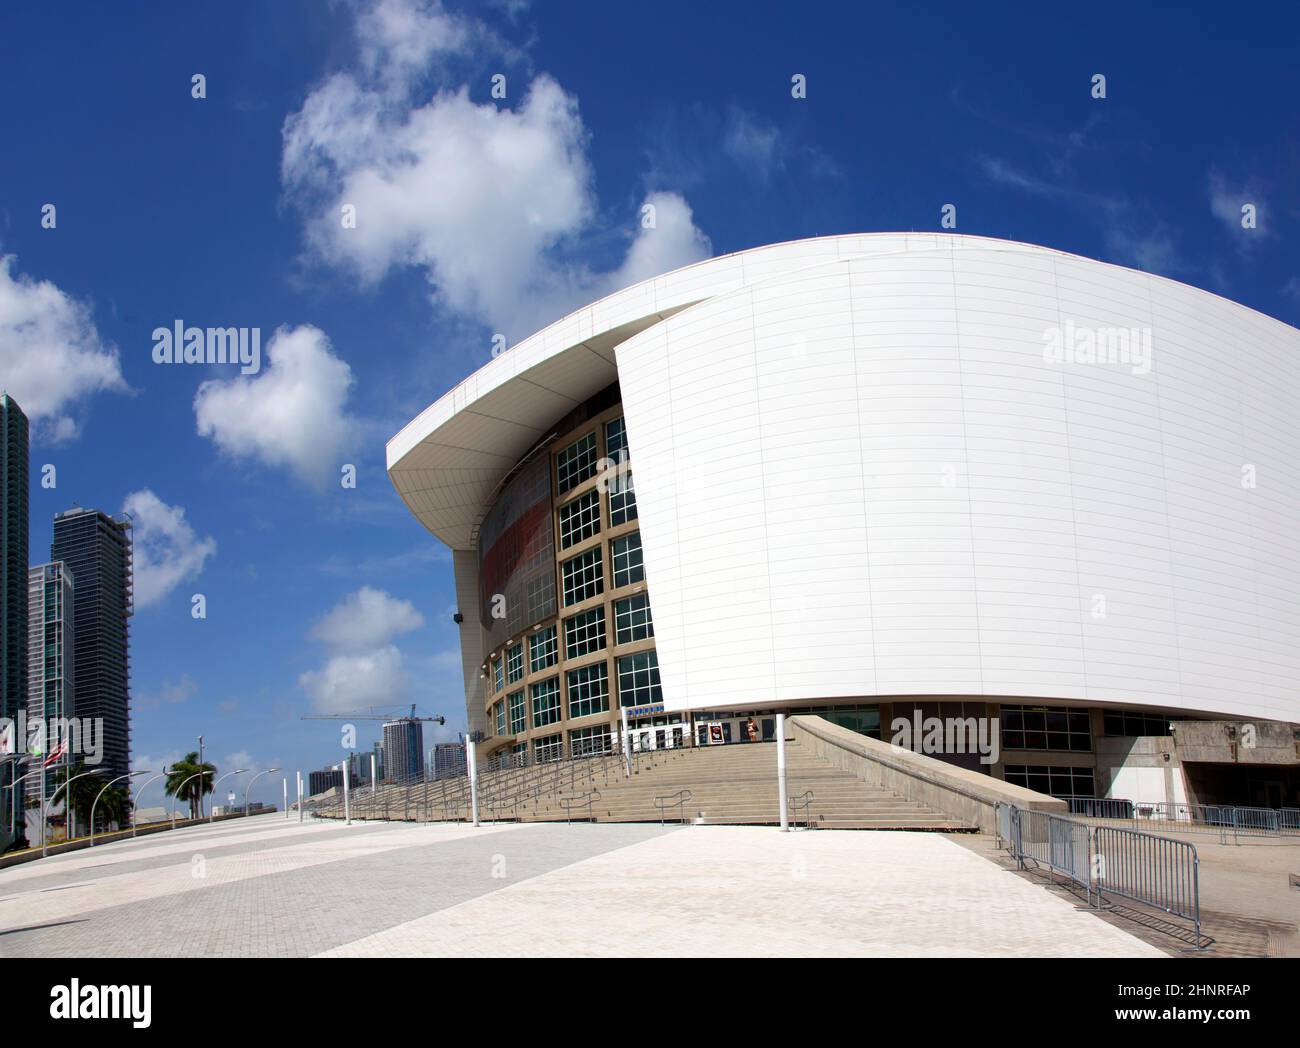 American Airlines Arena. Home of the Miami Heat basketball team. Stock Photo